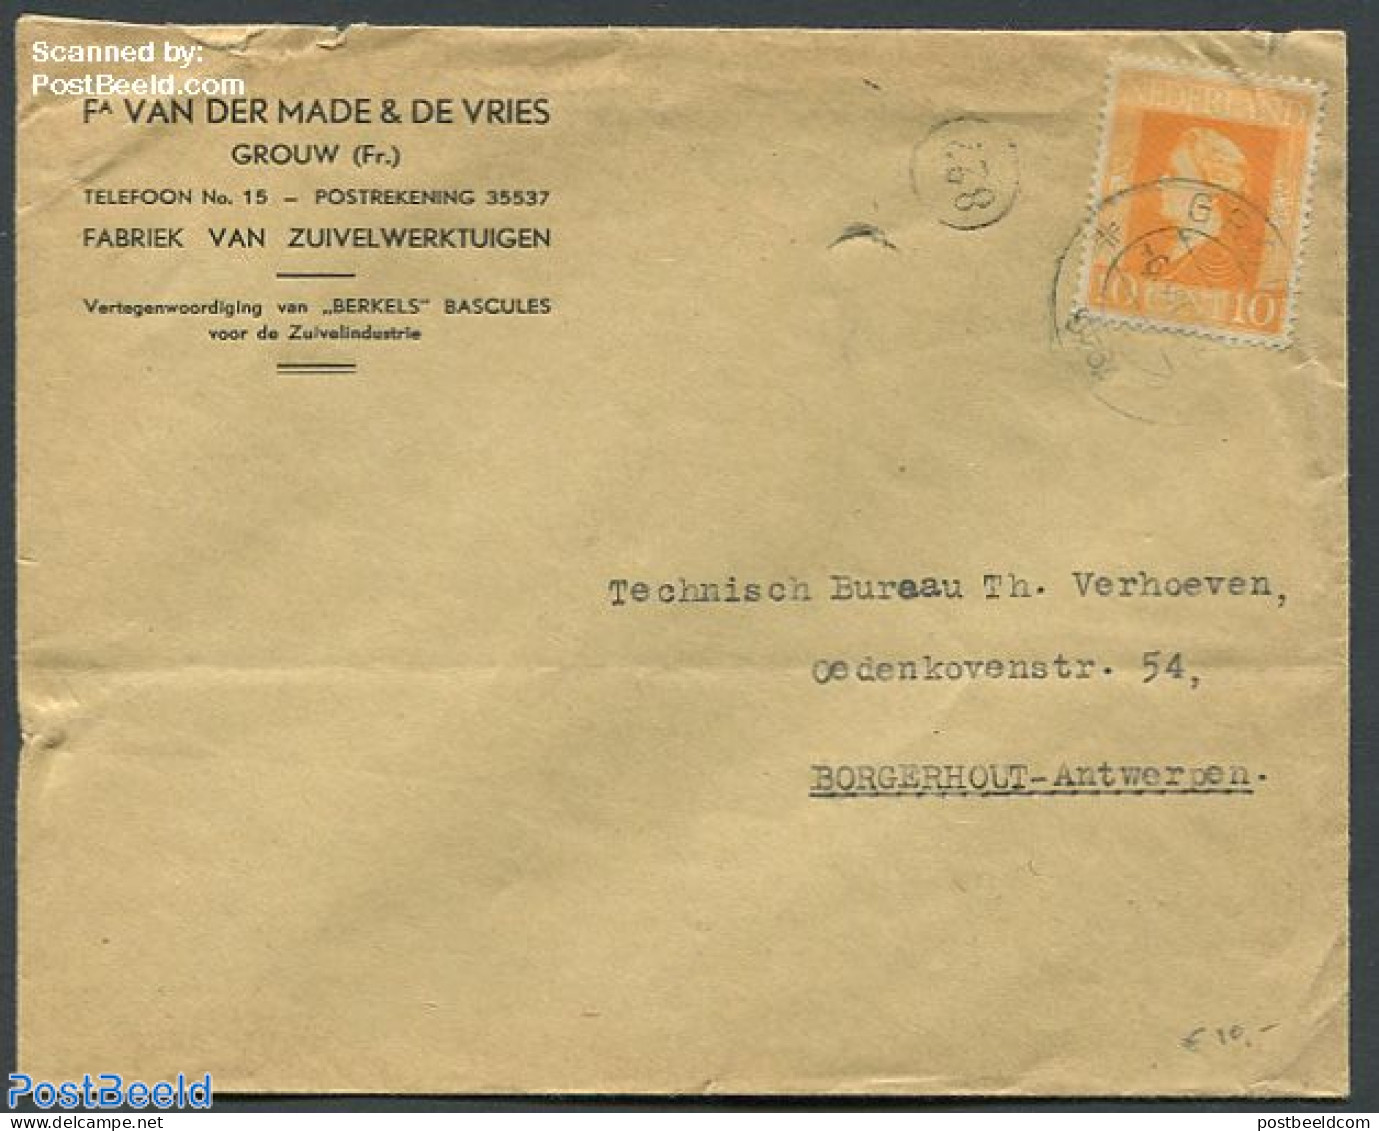 Netherlands 1944 Cover To Antwerpen With Nvhp No. 433, Postal History, History - Kings & Queens (Royalty) - Lettres & Documents